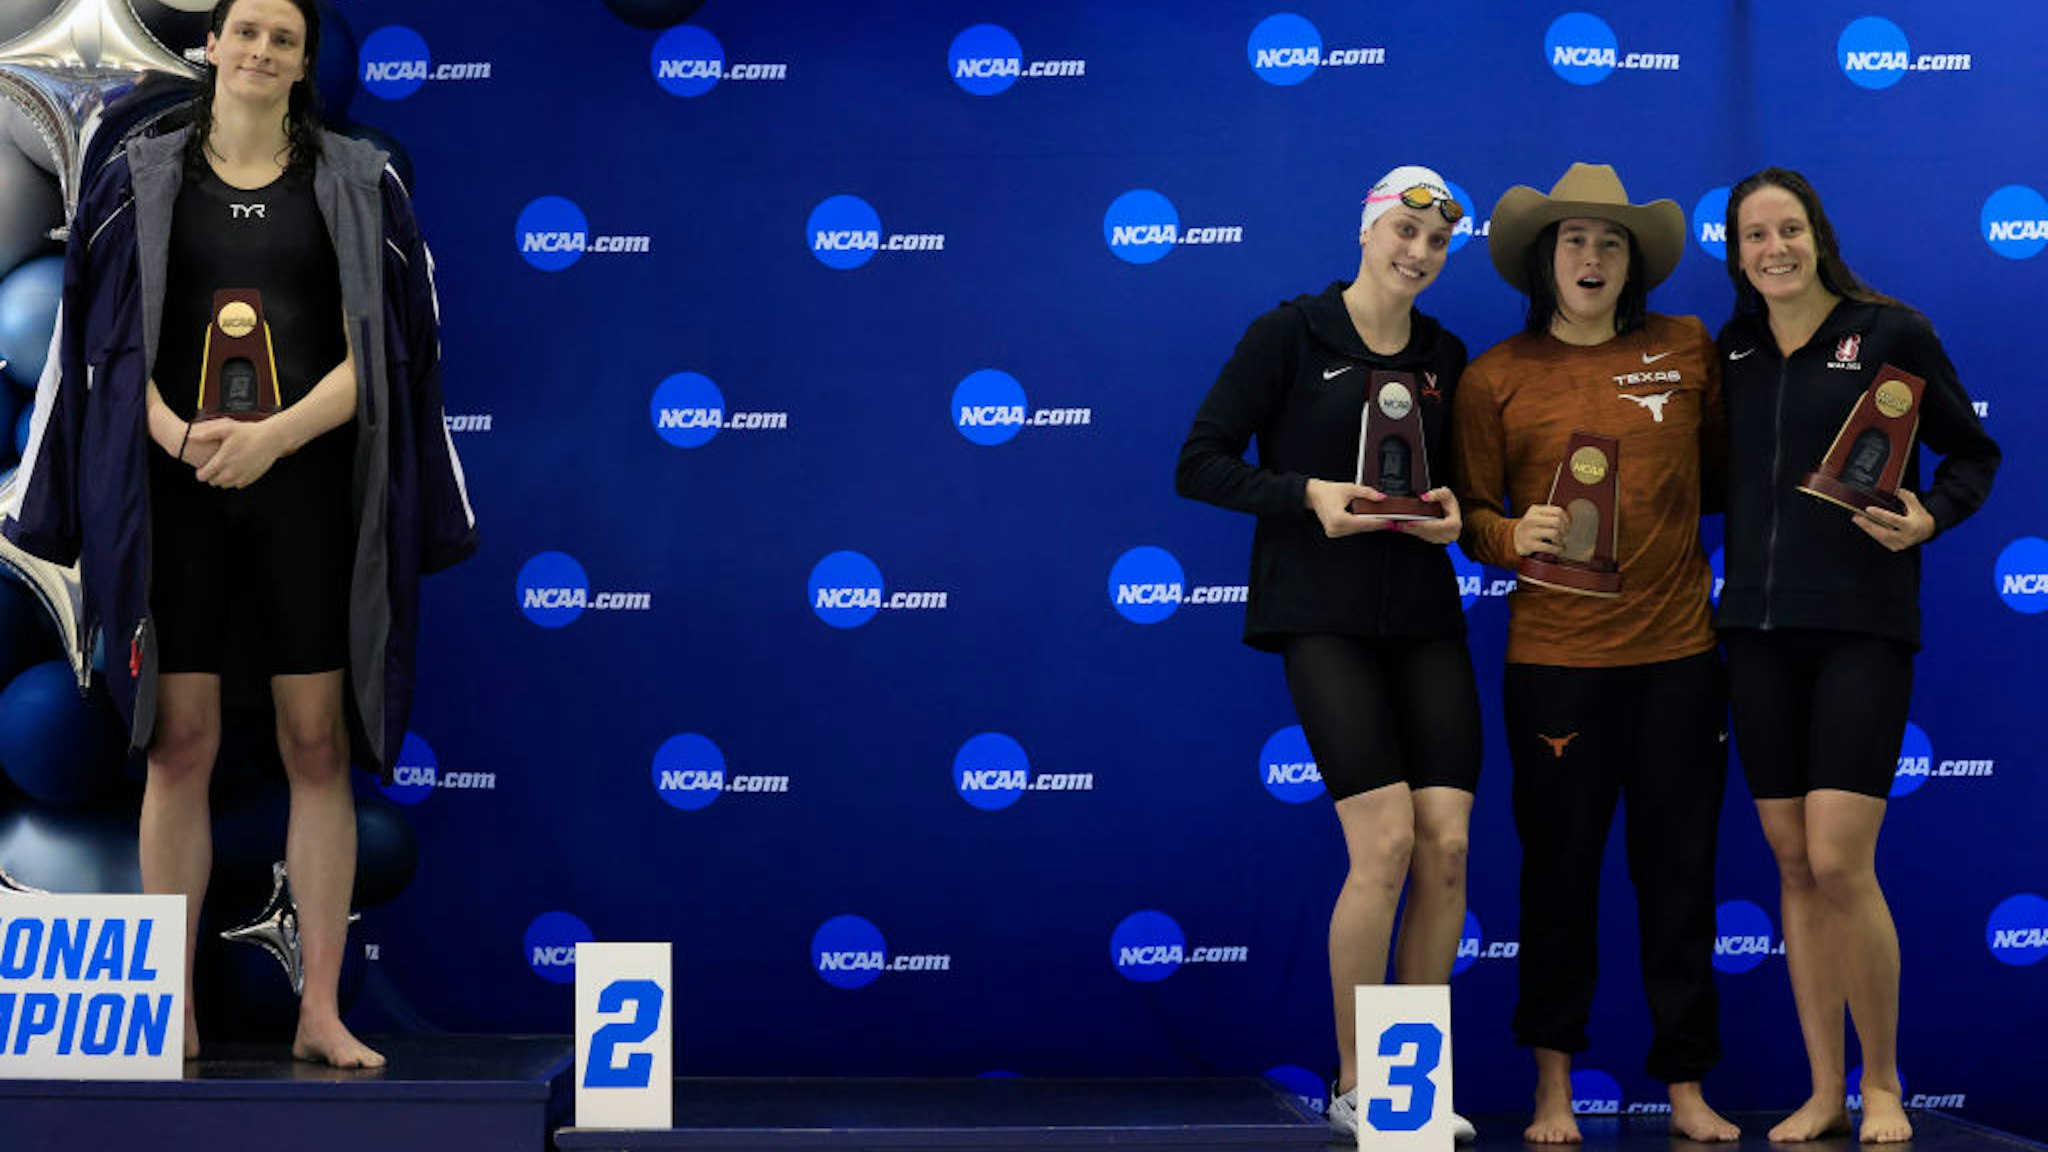 Transgender woman Lia Thomas (L) of the University of Pennsylvania stands on the podium after winning the 500-yard freestyle as other medalists (L-R) Emma Weyant, Erica Sullivan and Brooke Forde pose for a photo at the NCAA Division I Women's Swimming & Diving Championshipon March 17, 2022 in Atlanta, Georgia.